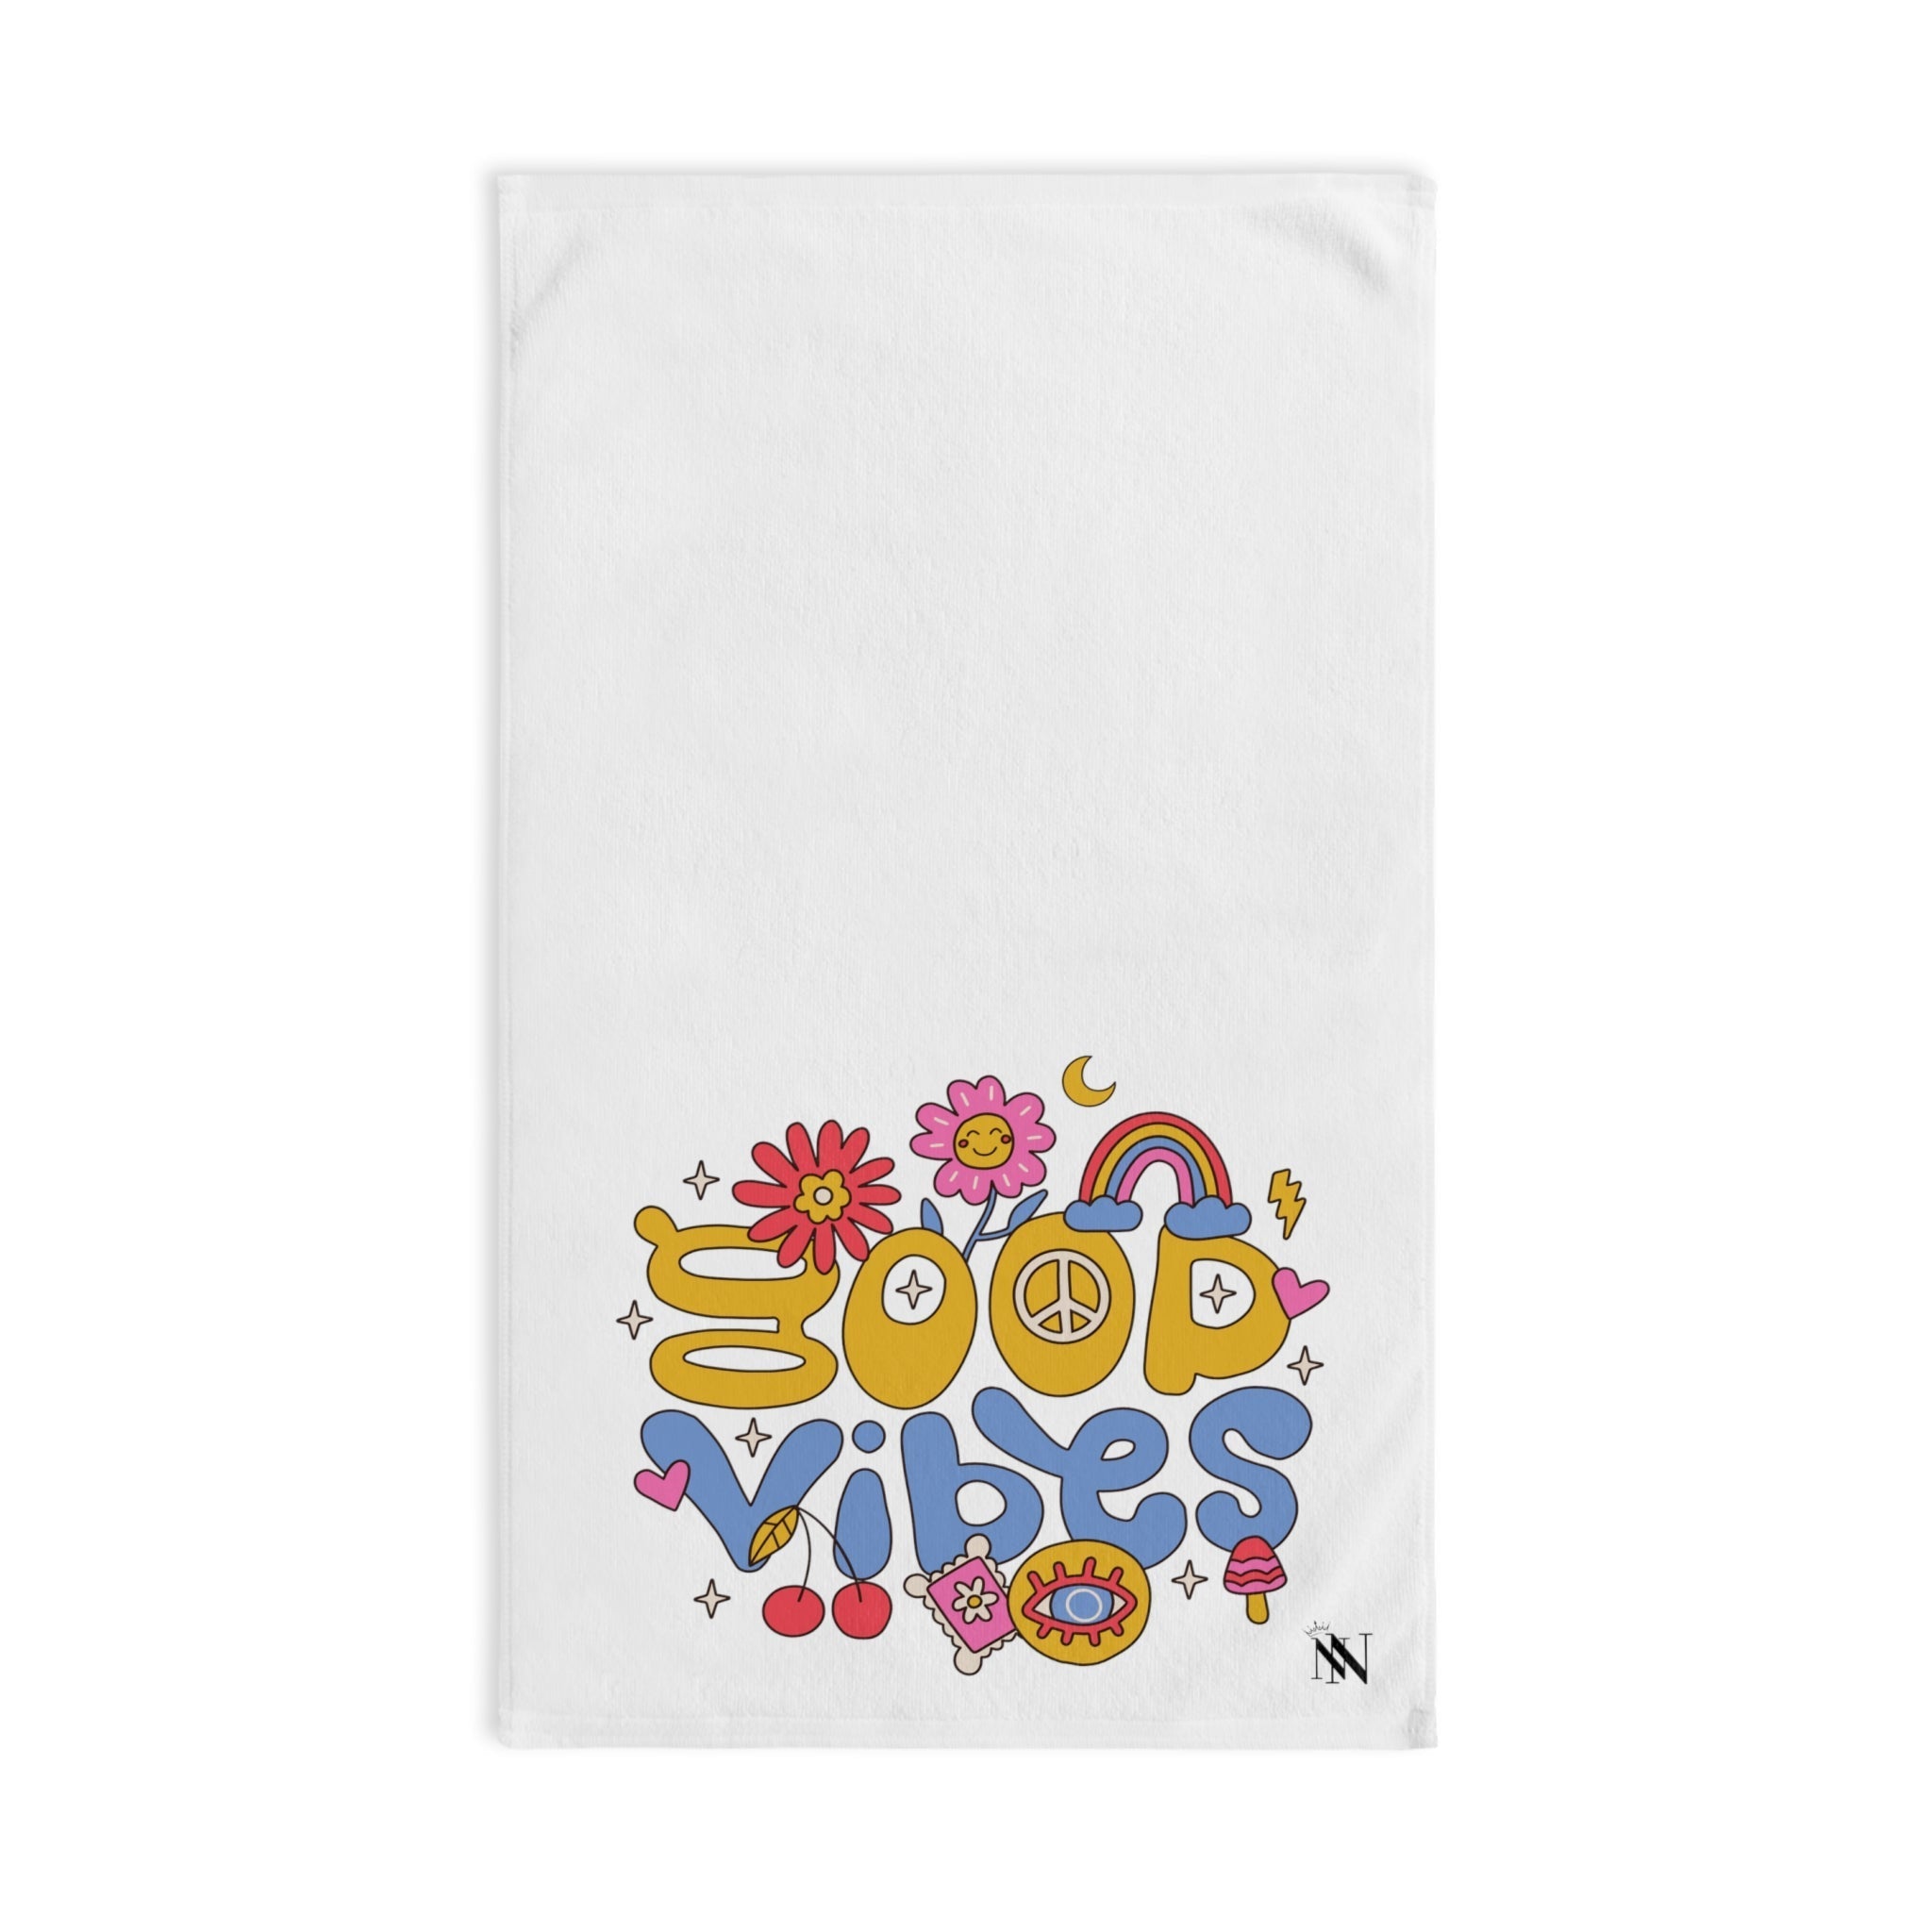 Hippie Vibes GoodWhite | Funny Gifts for Men - Gifts for Him - Birthday Gifts for Men, Him, Her, Husband, Boyfriend, Girlfriend, New Couple Gifts, Fathers & Valentines Day Gifts, Christmas Gifts NECTAR NAPKINS